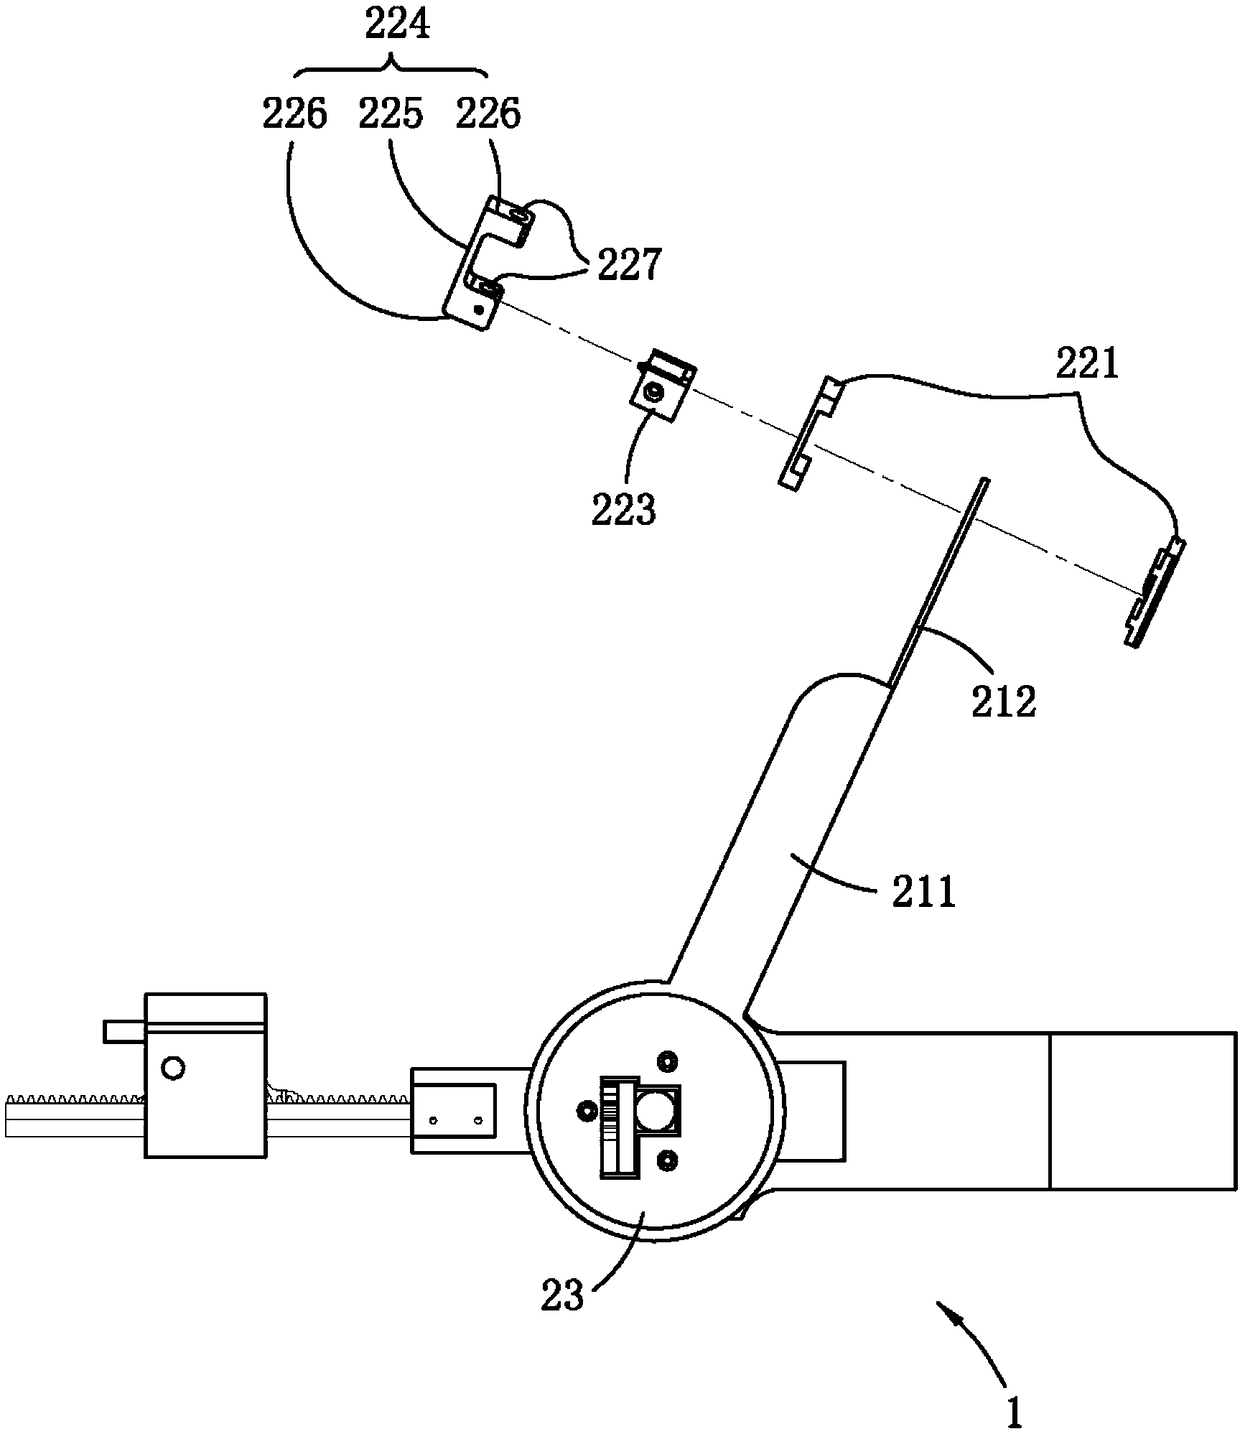 Noninvasive head stereotactic auxiliary device